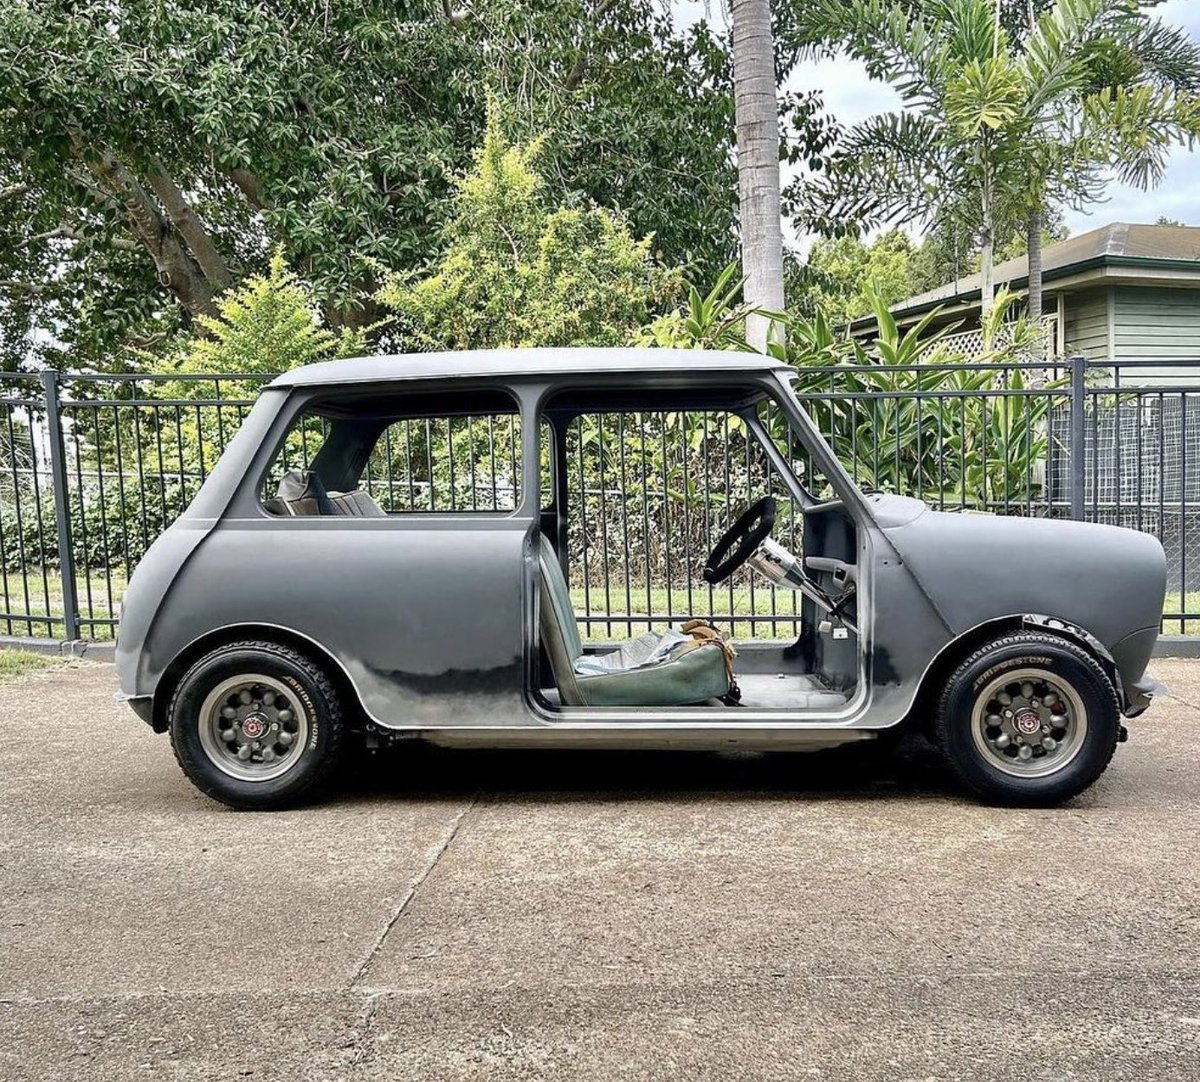 What's the first thing you would do on this build?

🩶 @deluxe.with.a.twist

#ukminis #mini #classicmini #classicminis #originalmini #carsofinstagram #mk1mini #mk2mini